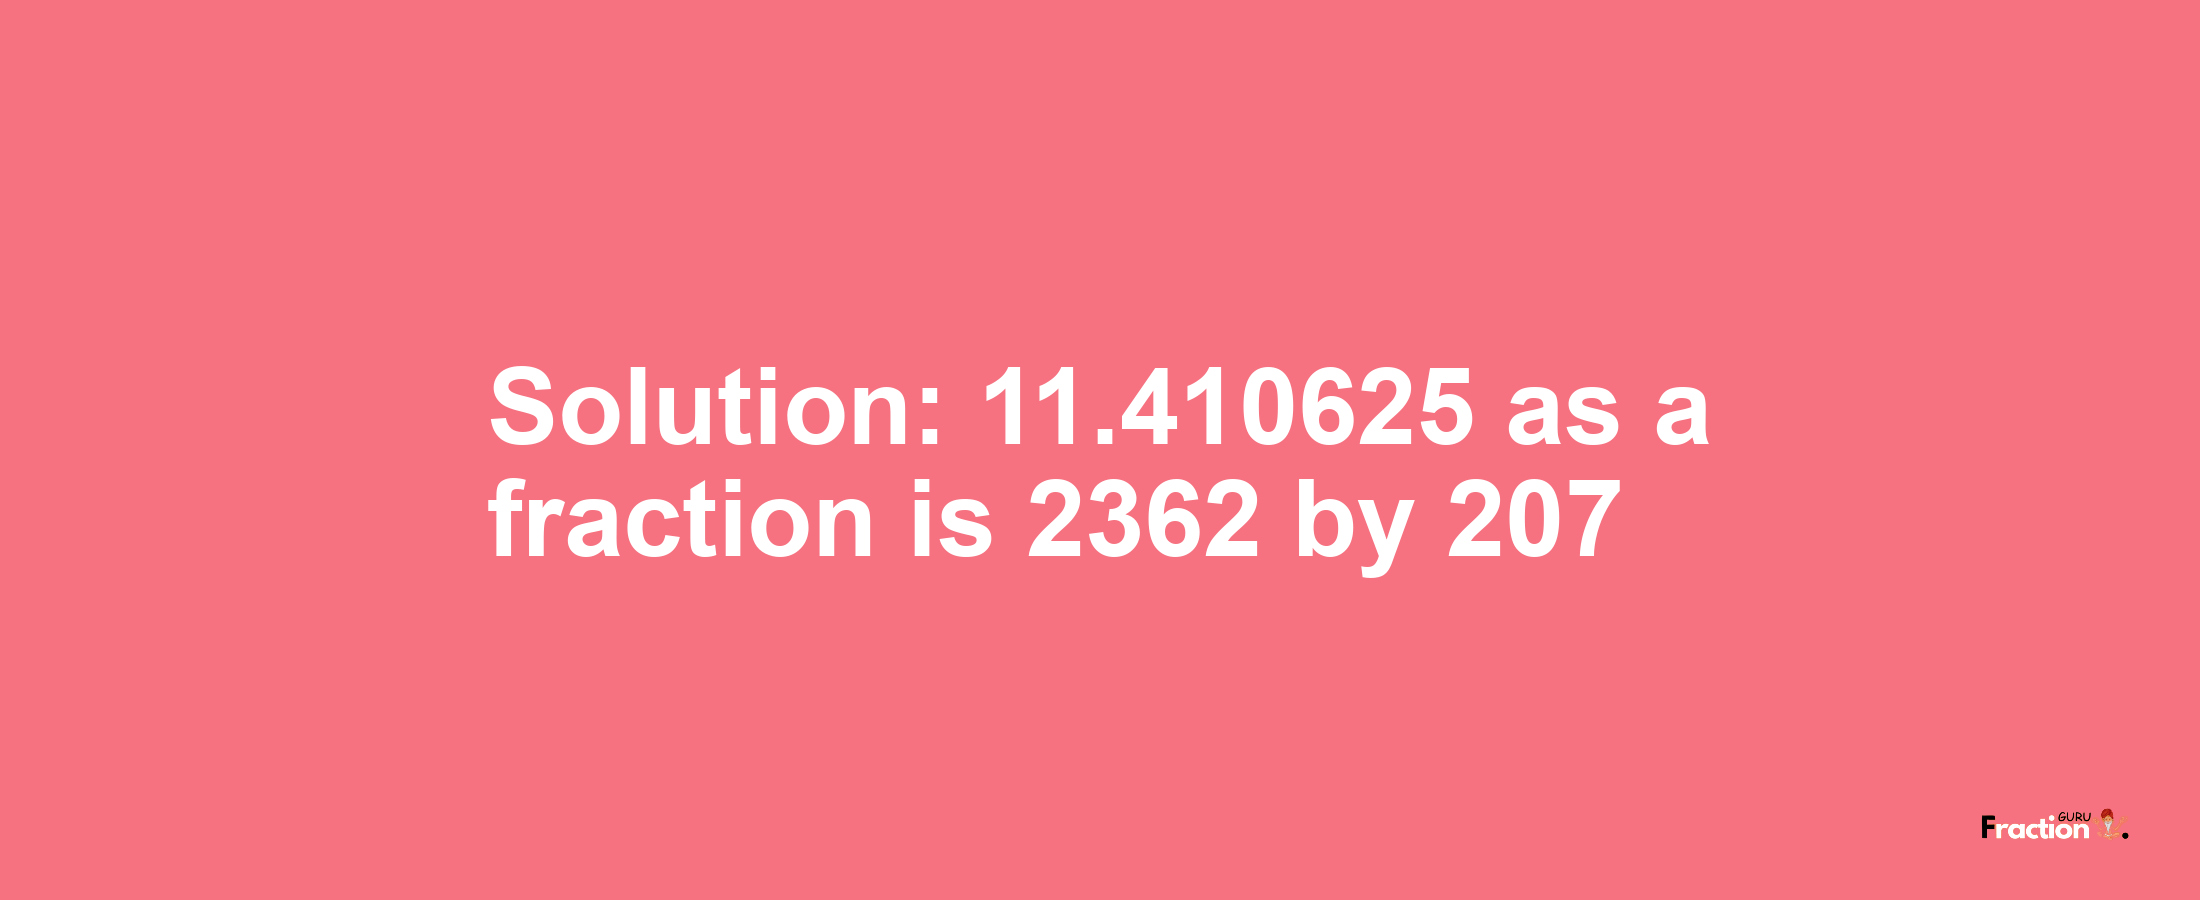 Solution:11.410625 as a fraction is 2362/207